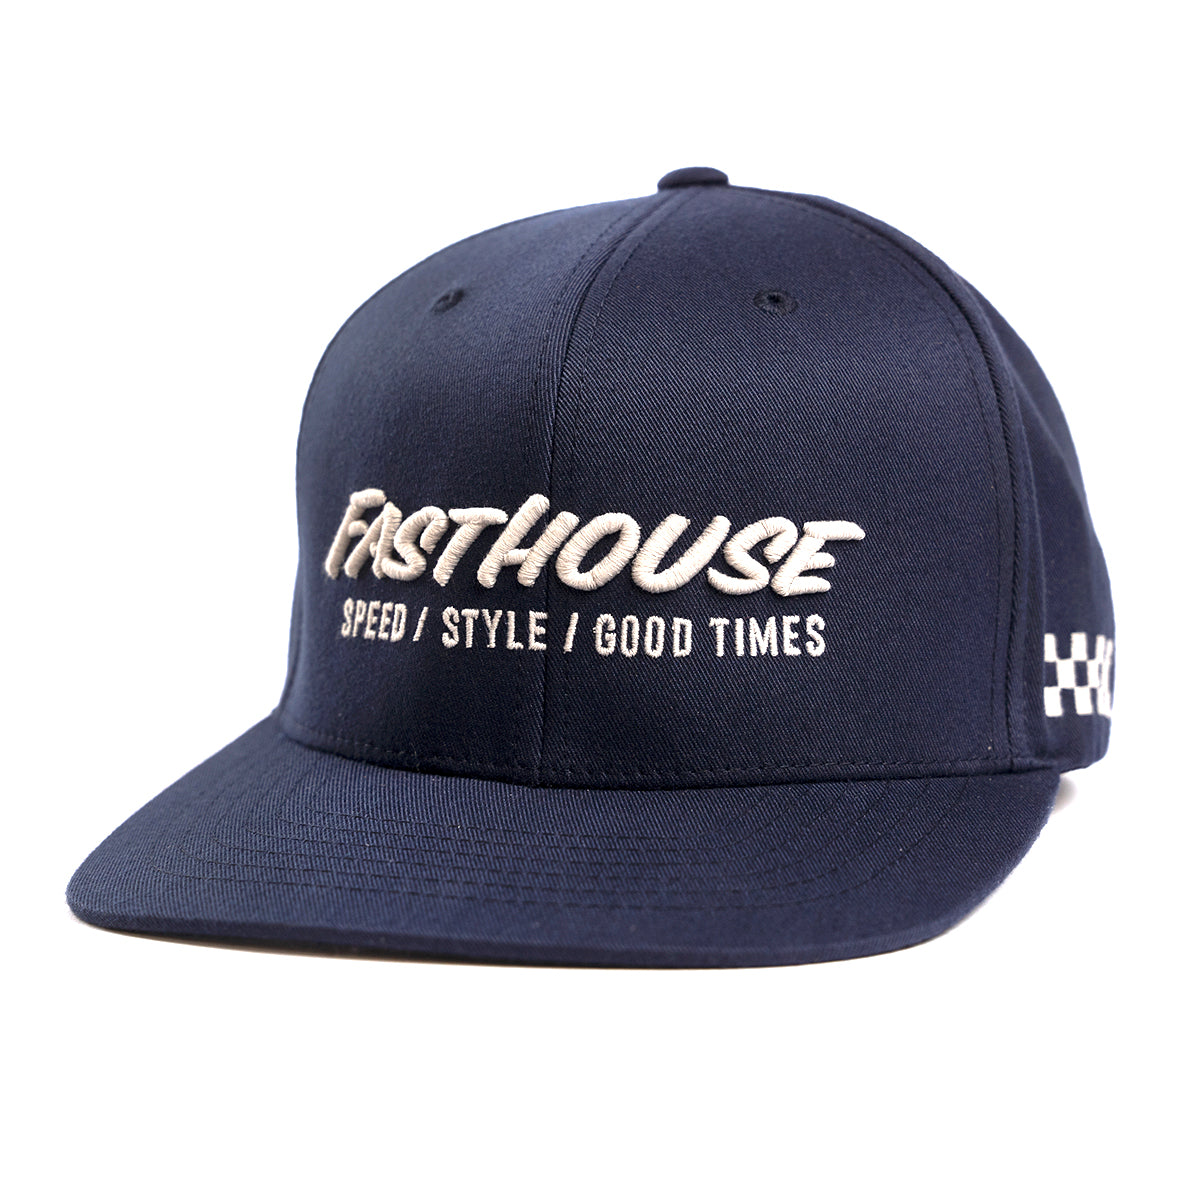 Classic Fitted Hat - Navy